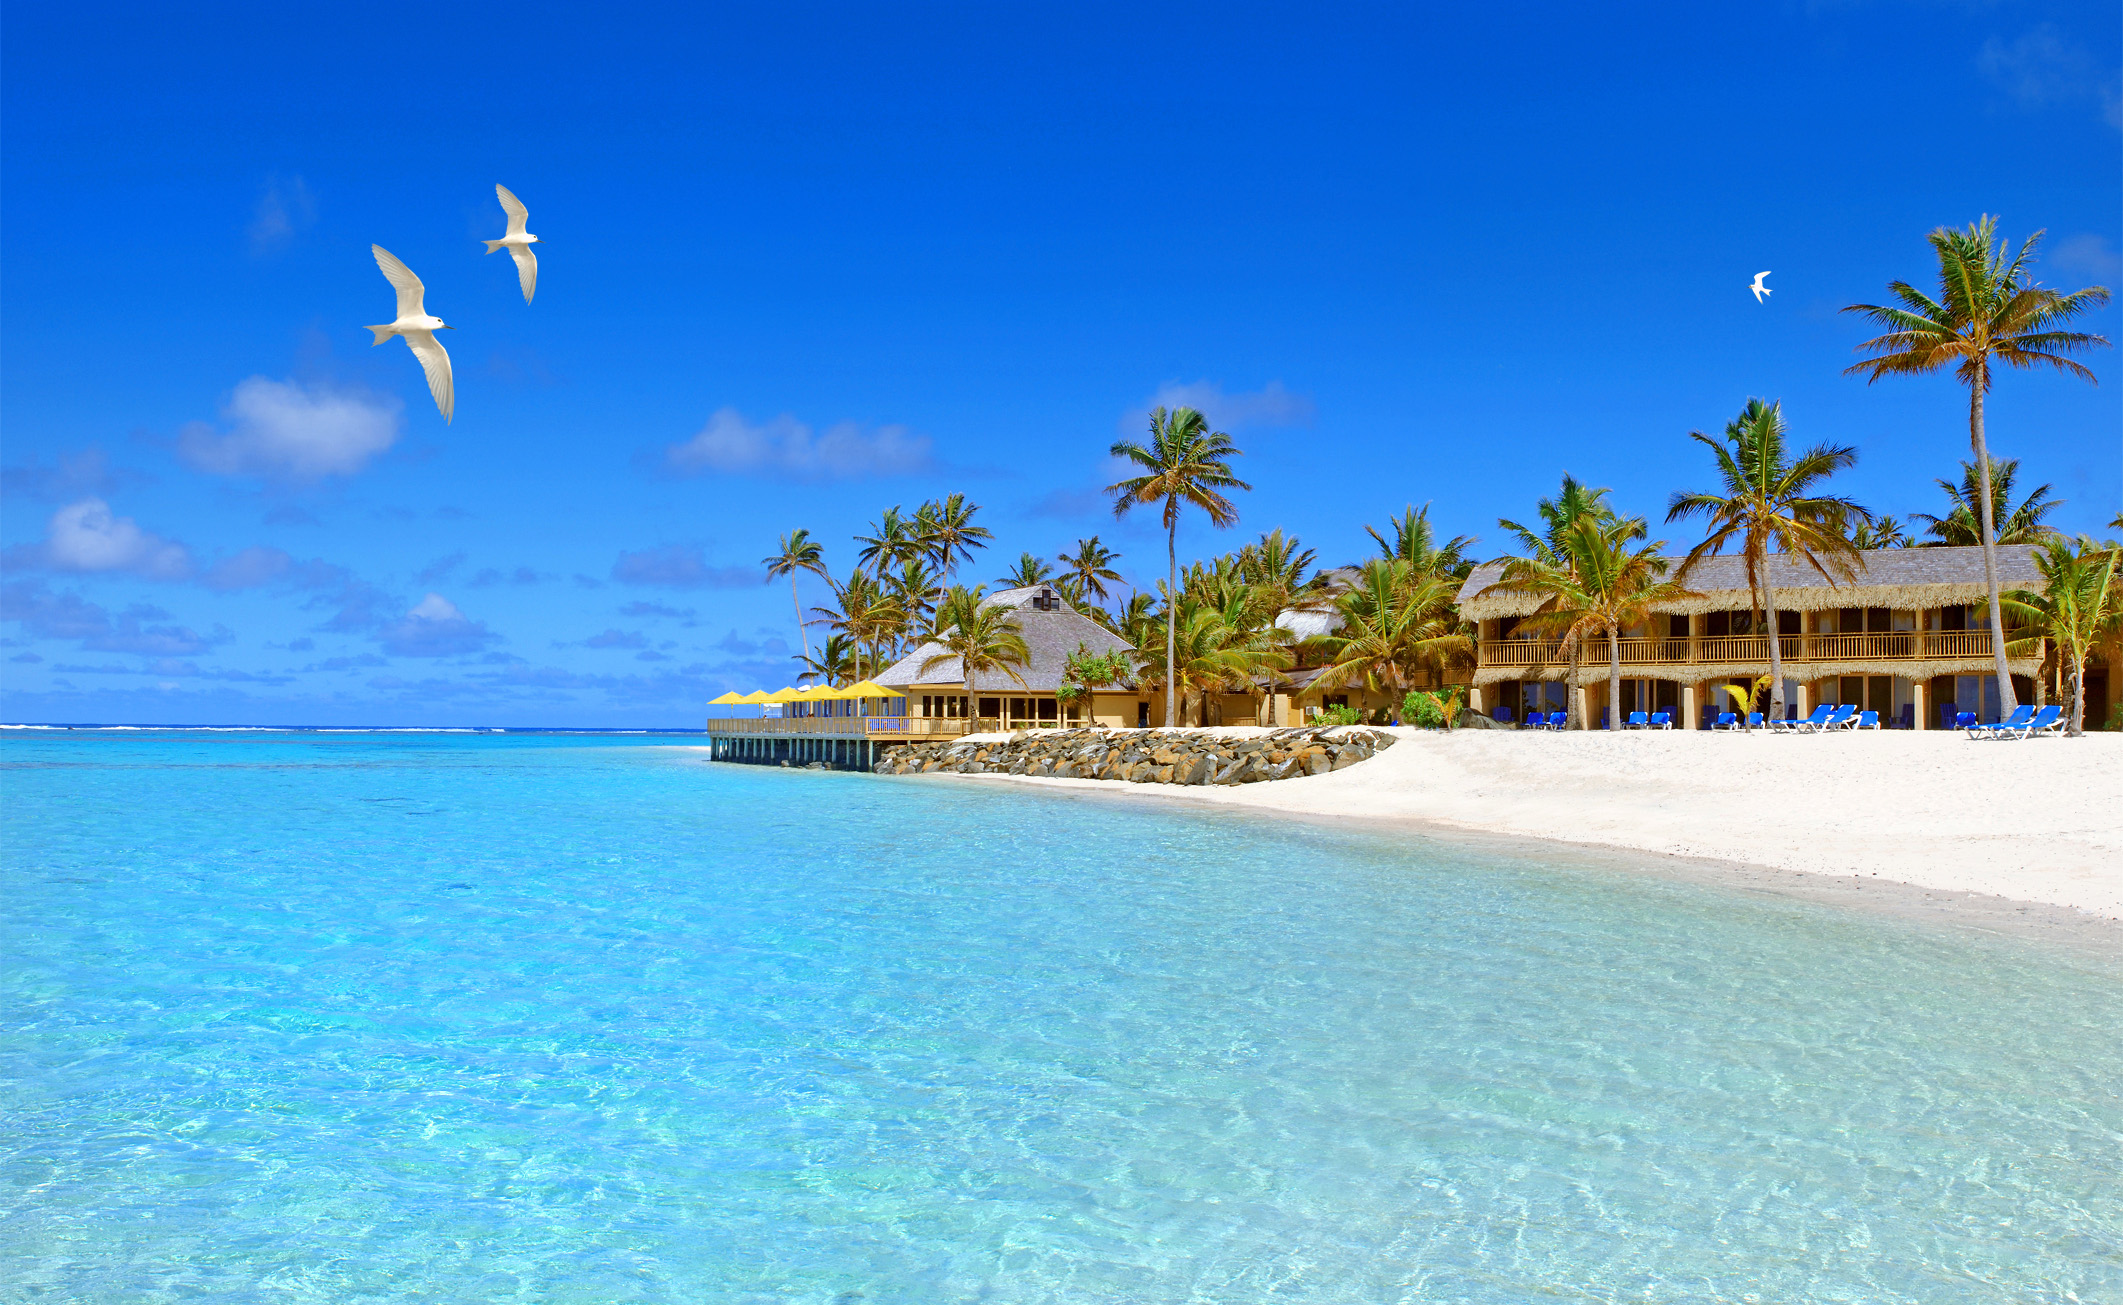 Aroa Aitutaki One Foot Island Cook Islands Most Beautiful And Famous Beaches In The World